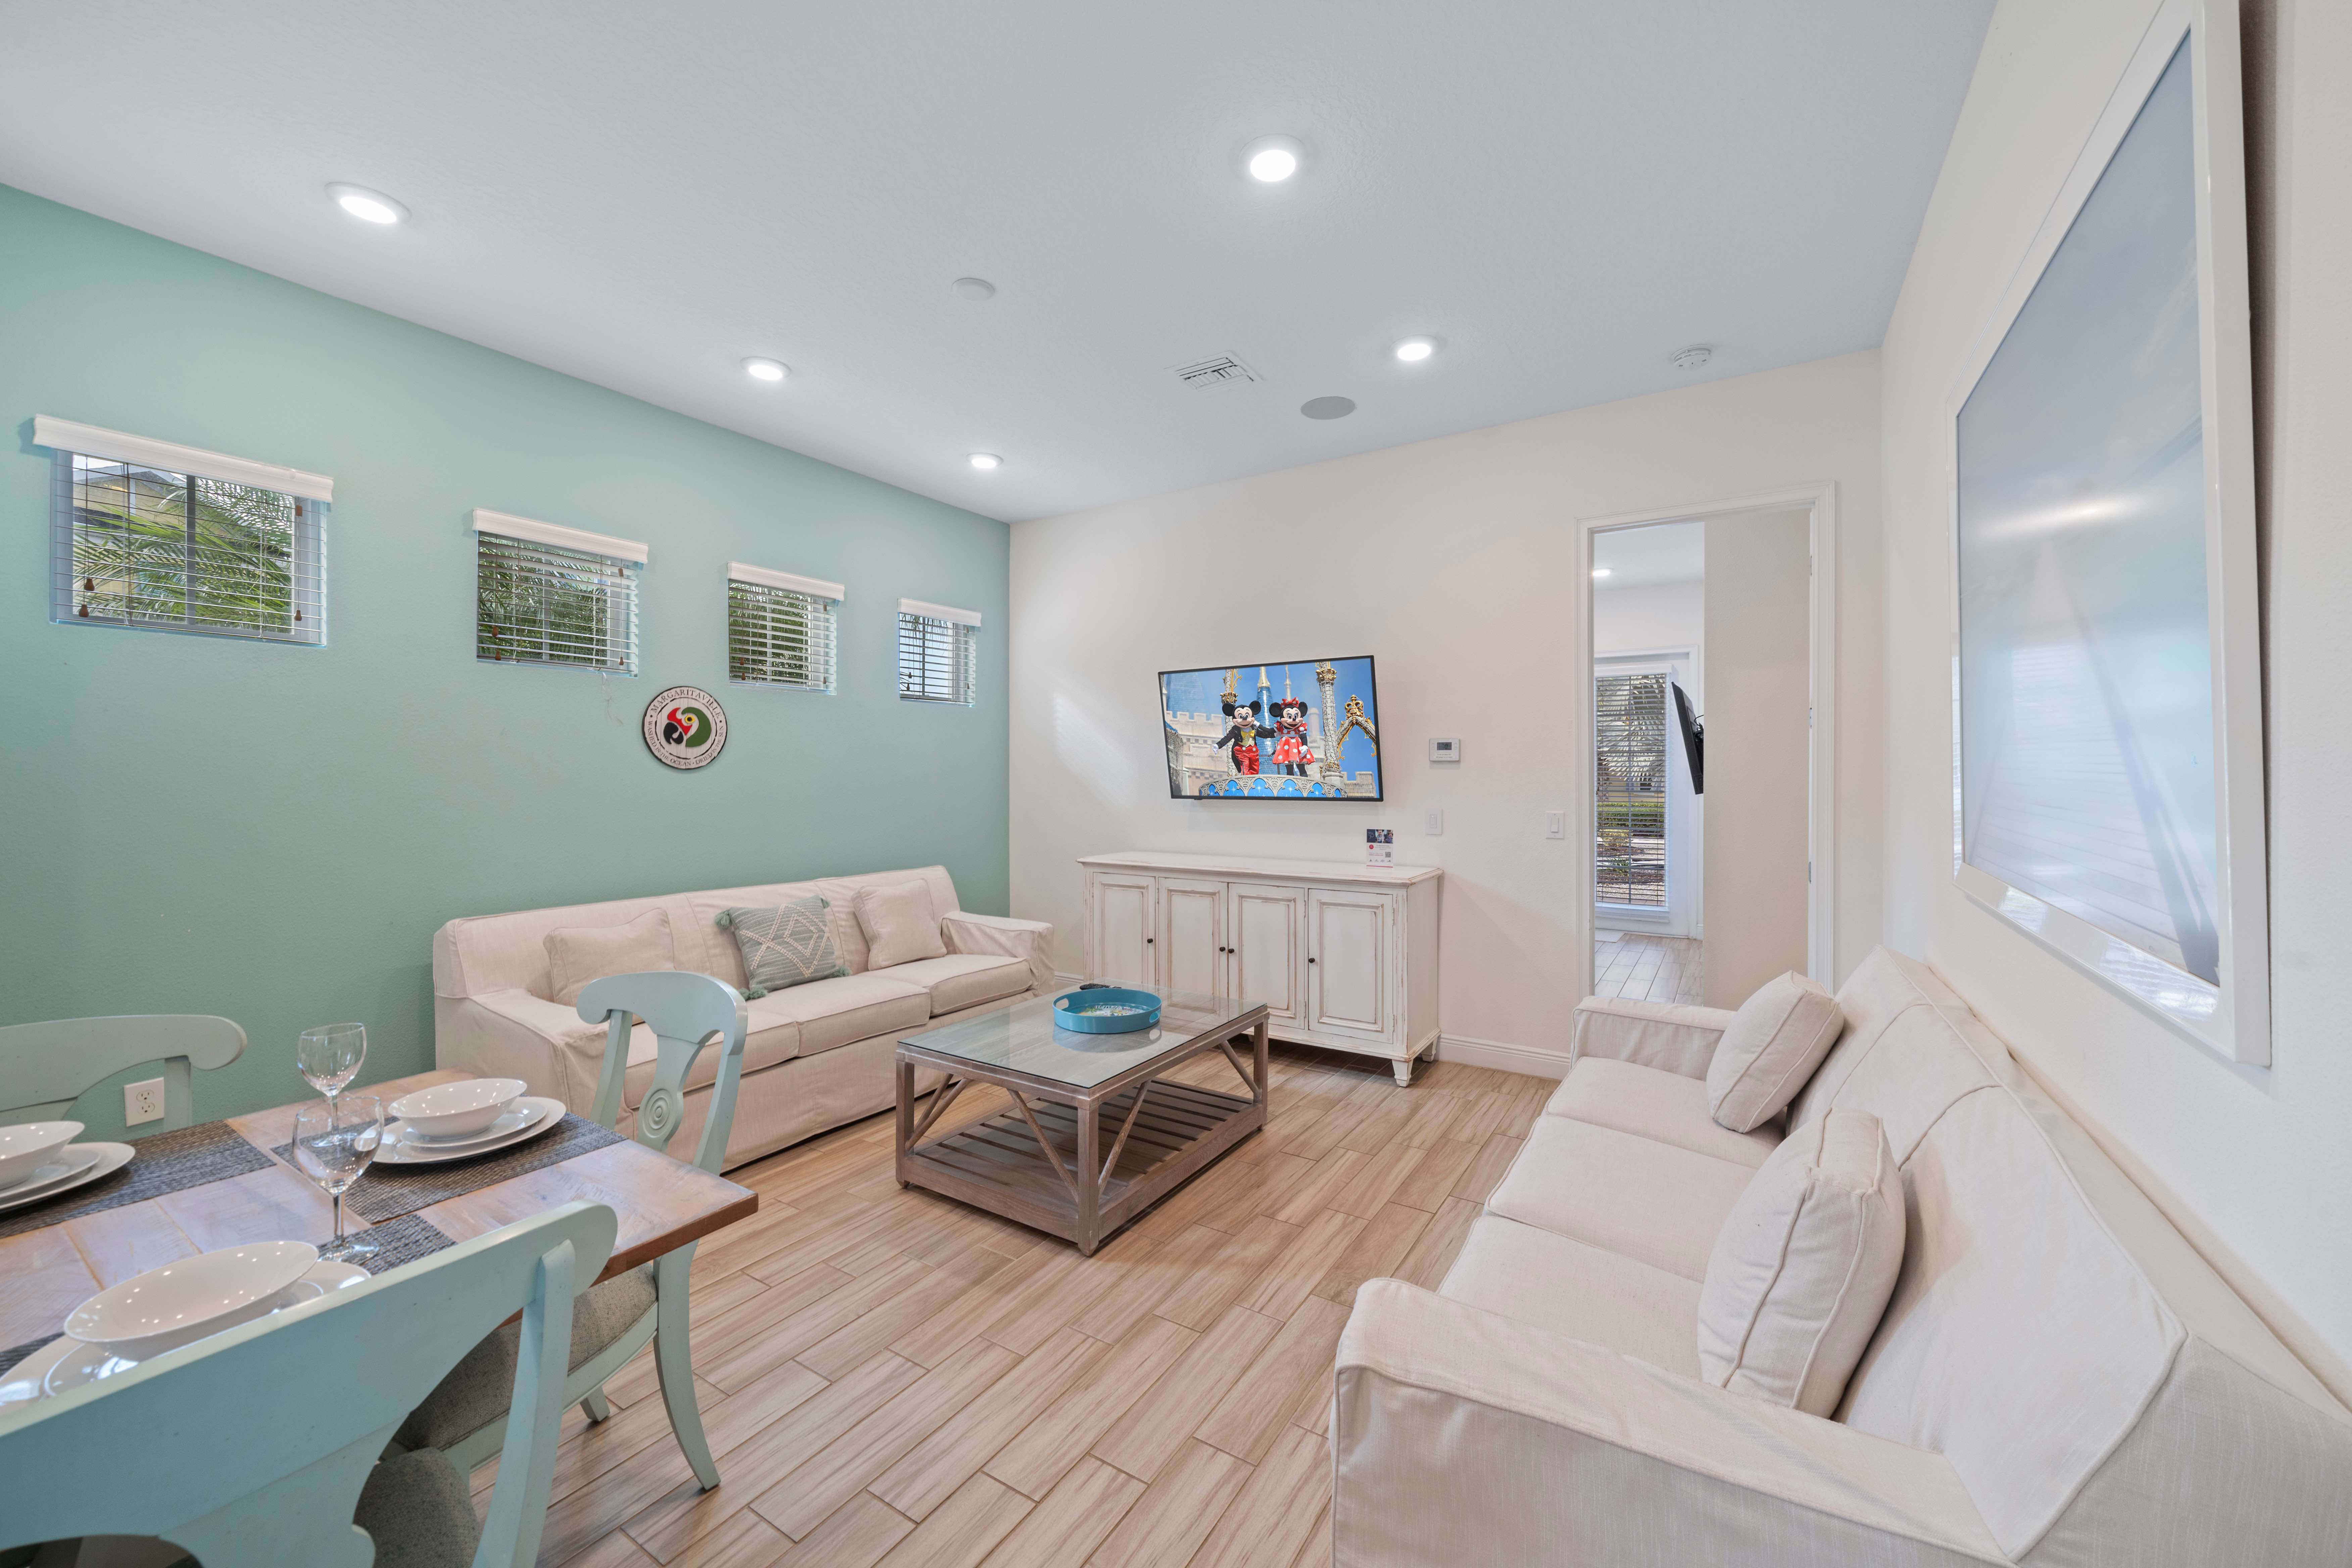 - Welcoming living area  of the townhouse in Kissimmee Florida - Experience comfort and convenience at the  living area - Entertainment meets relaxation, and every moment is effortlessly enjoyable